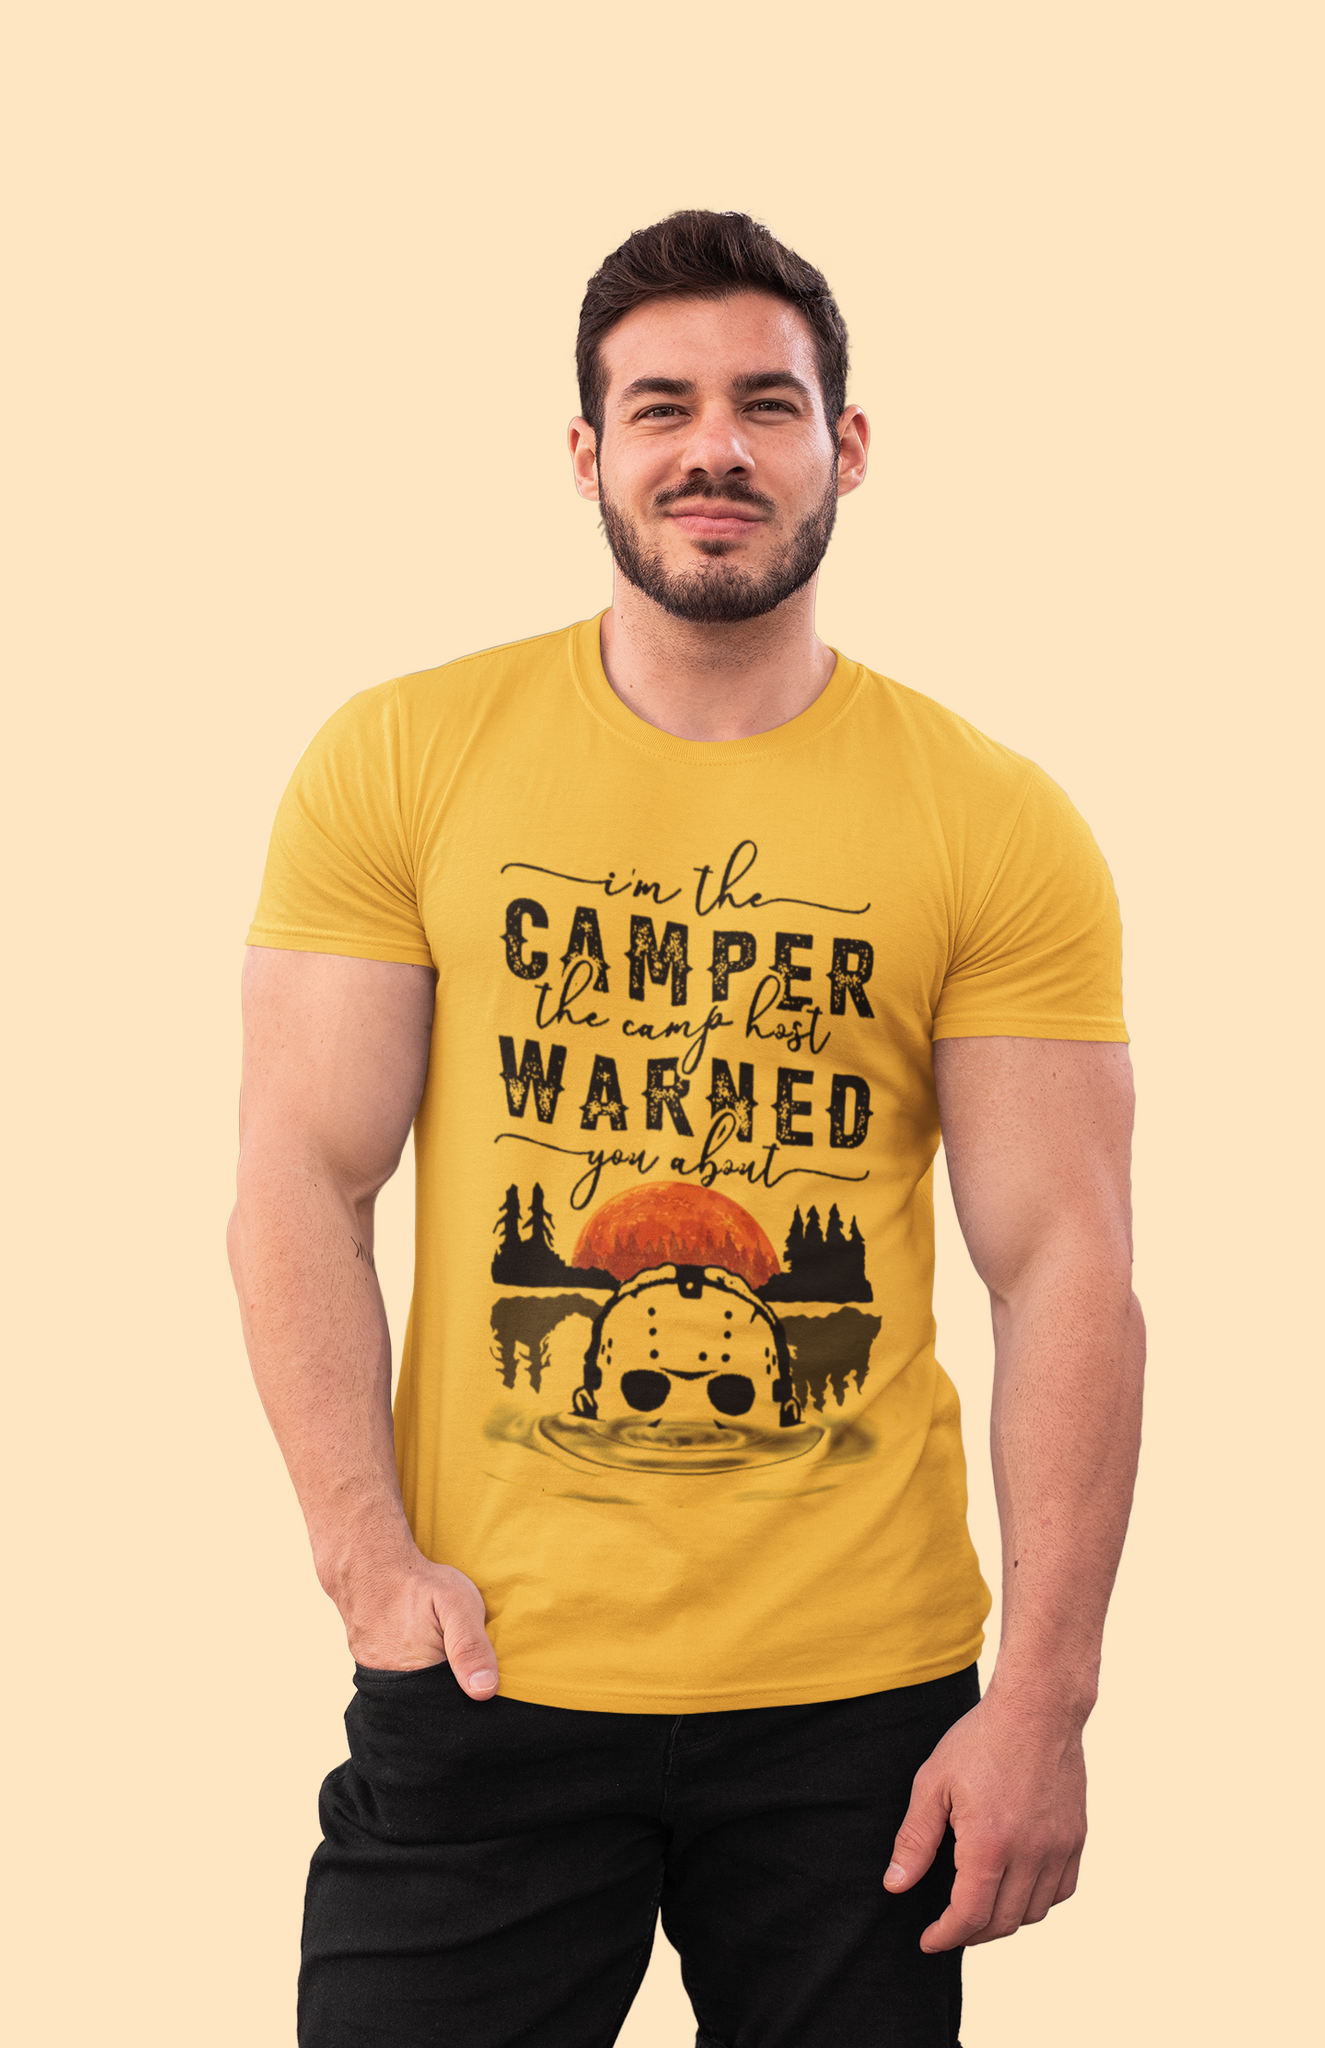 Friday 13th T Shirt, In The Camper The Camp Host Warned You About Tshirt, Jason Voorhees T Shirt, Halloween Gifts